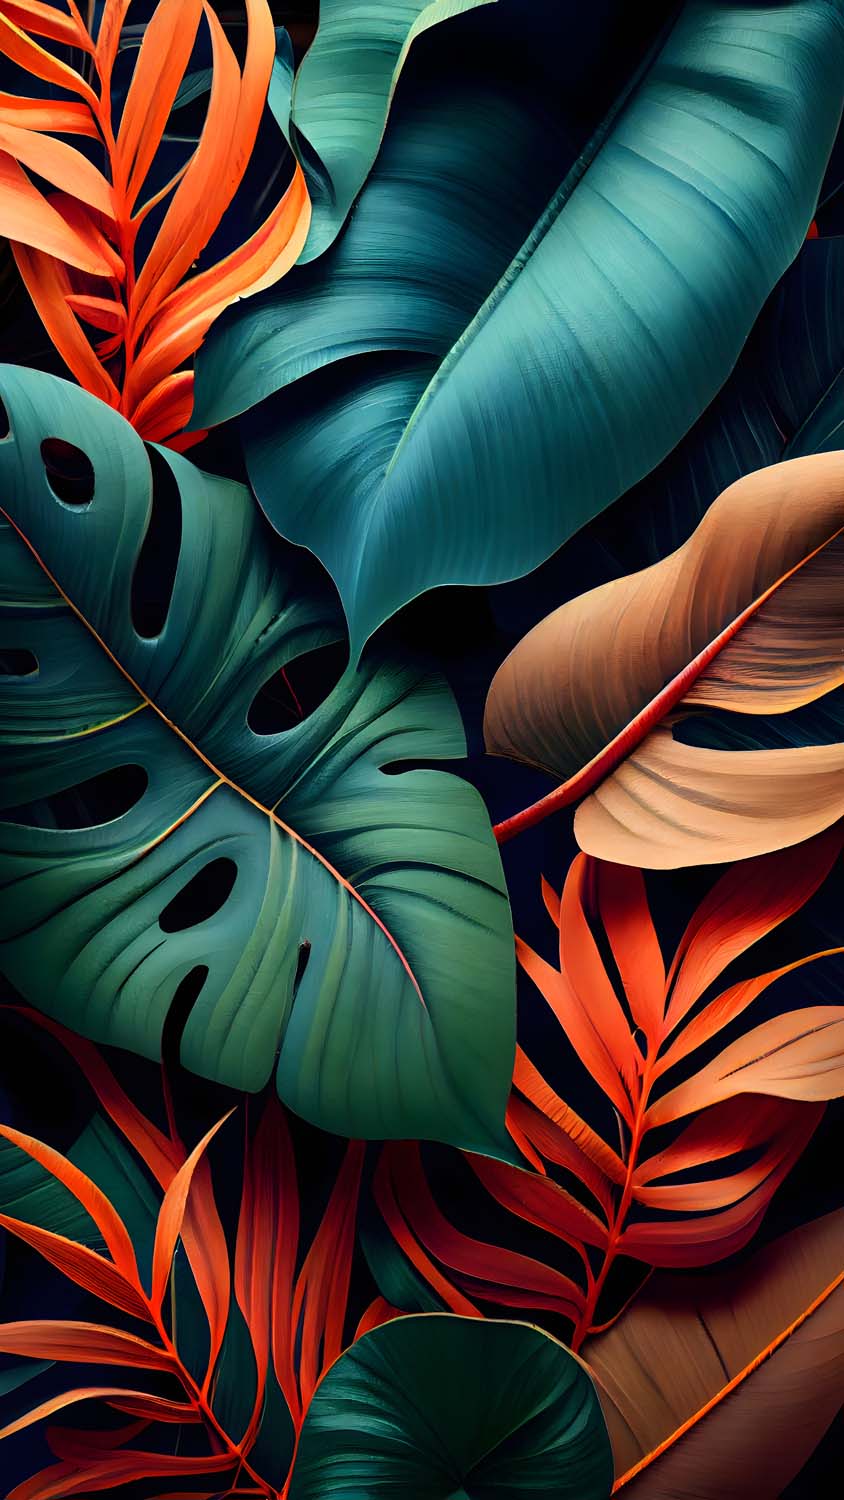 Download wallpaper 1125x2436 pattern tropical flowers leaves iphone x  1125x2436 hd background 16259